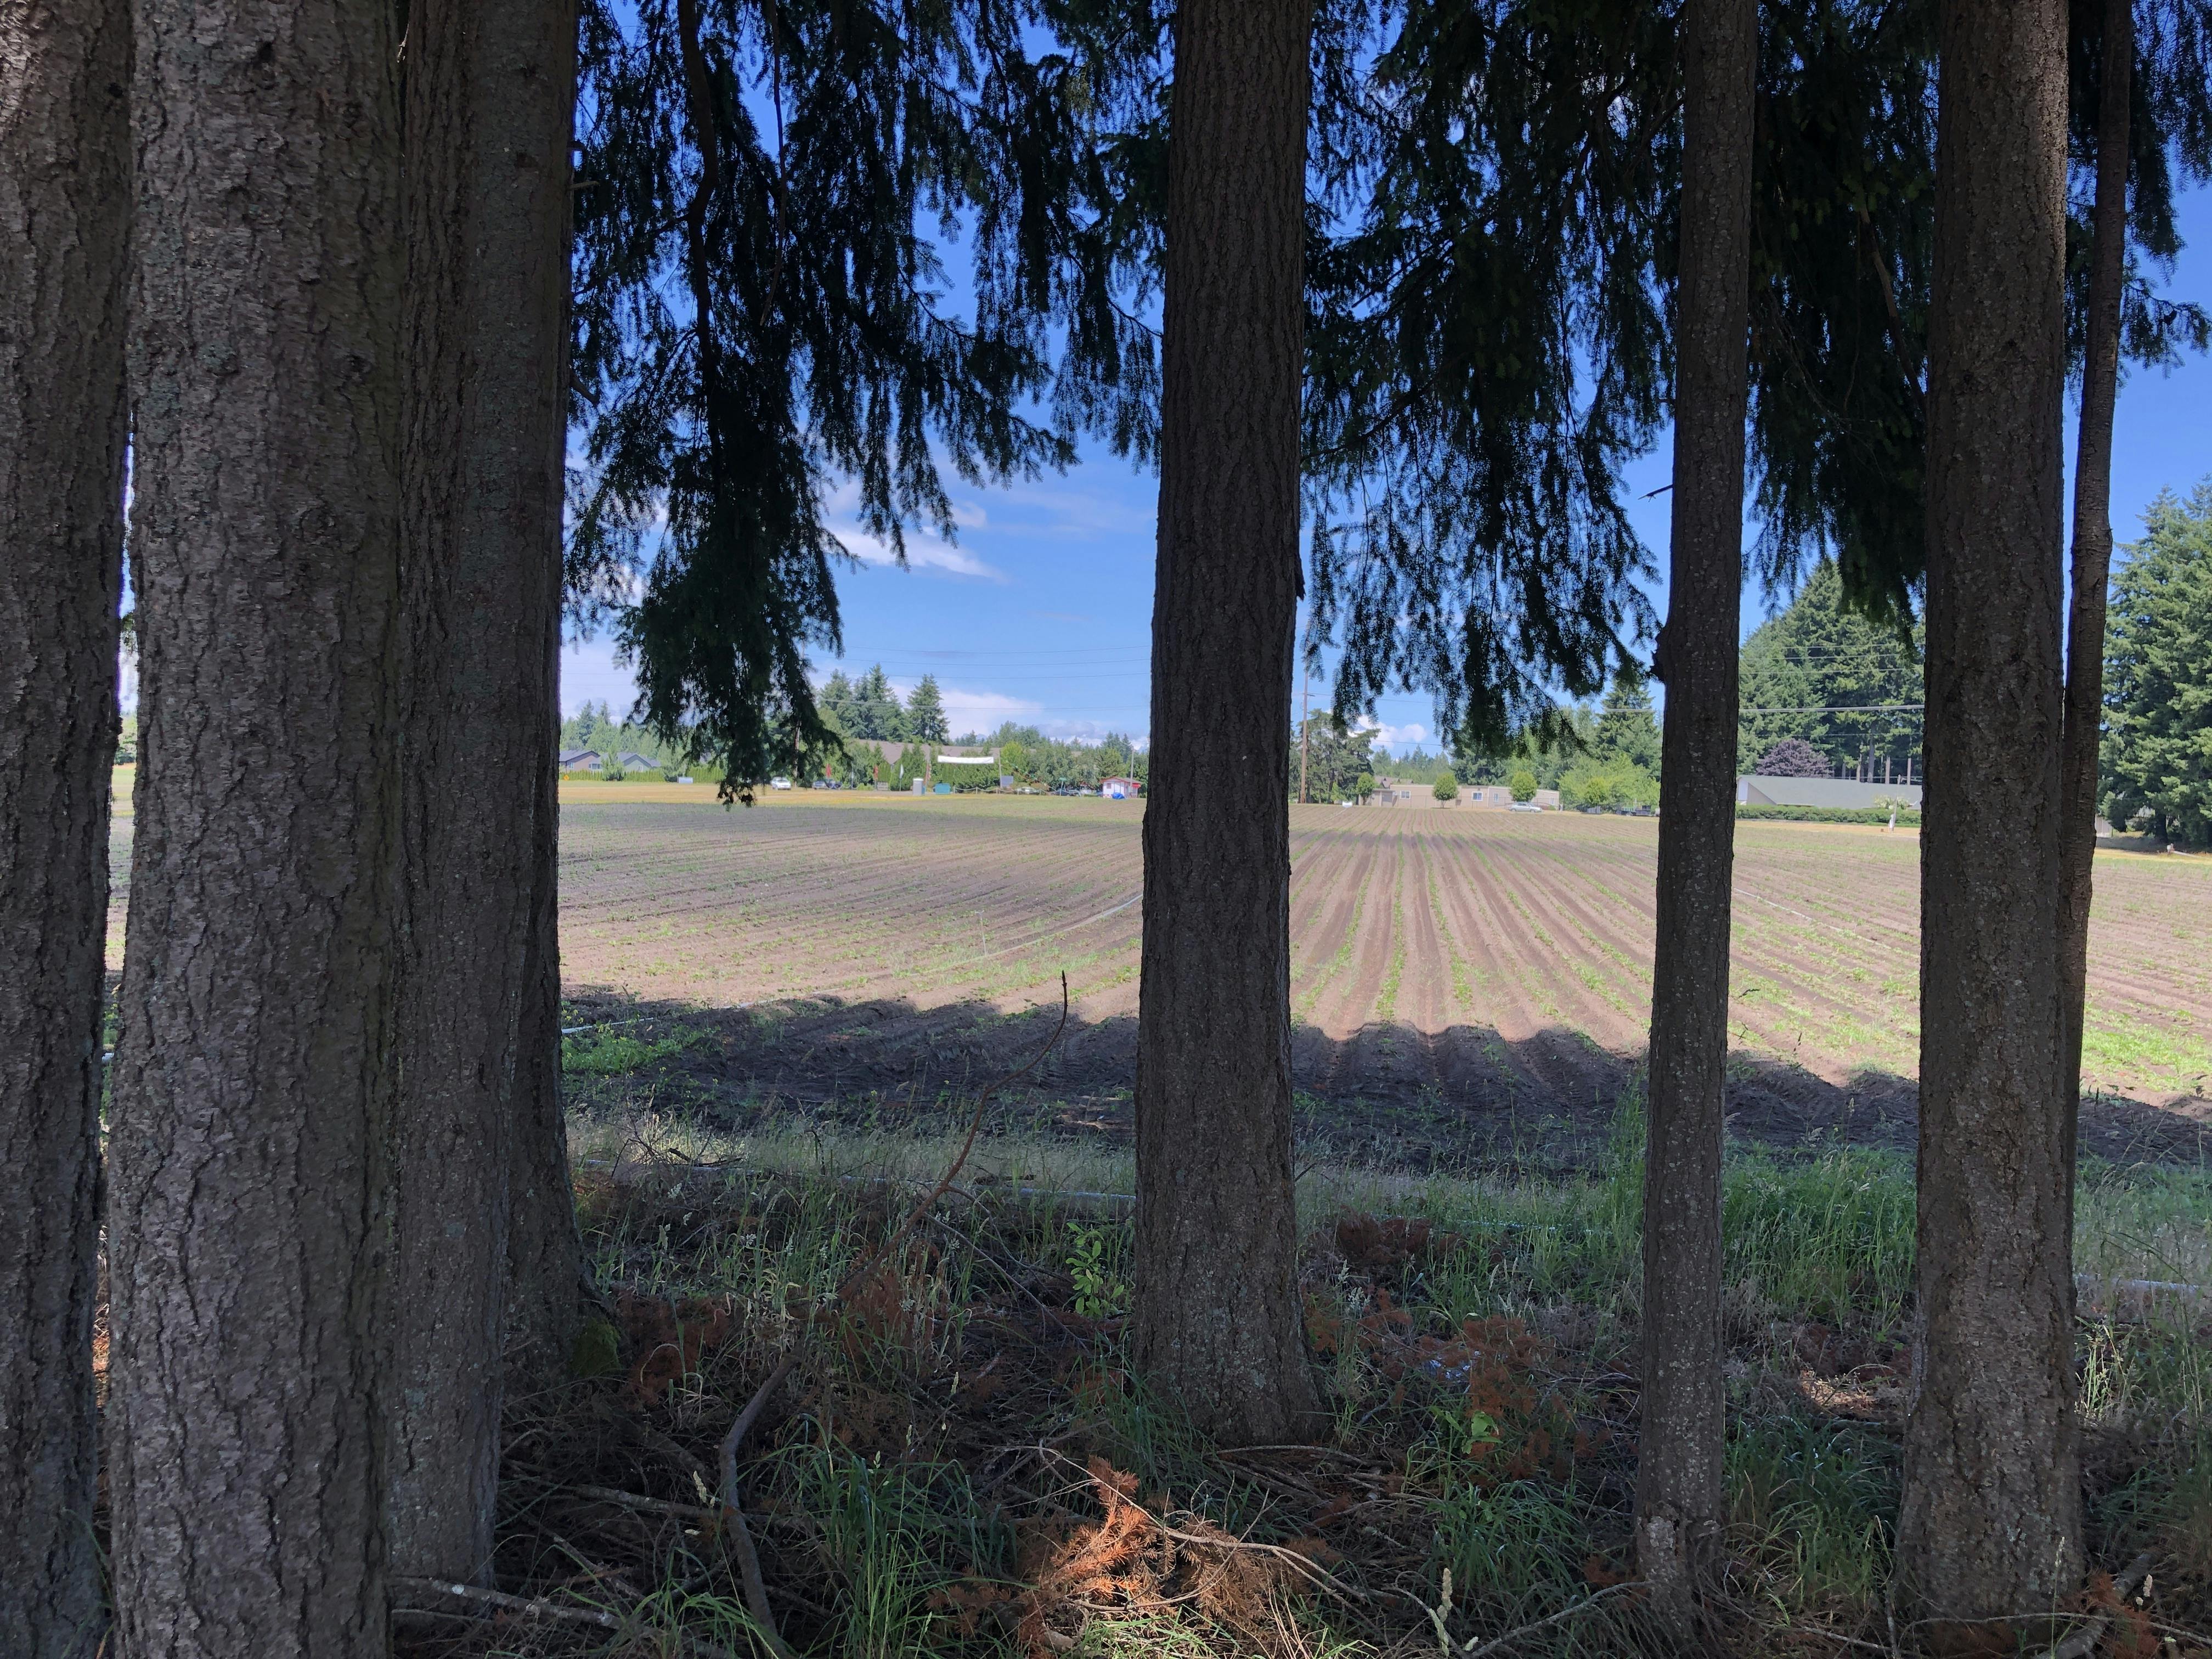 View from wooded area at Yelm Highway Community Park site